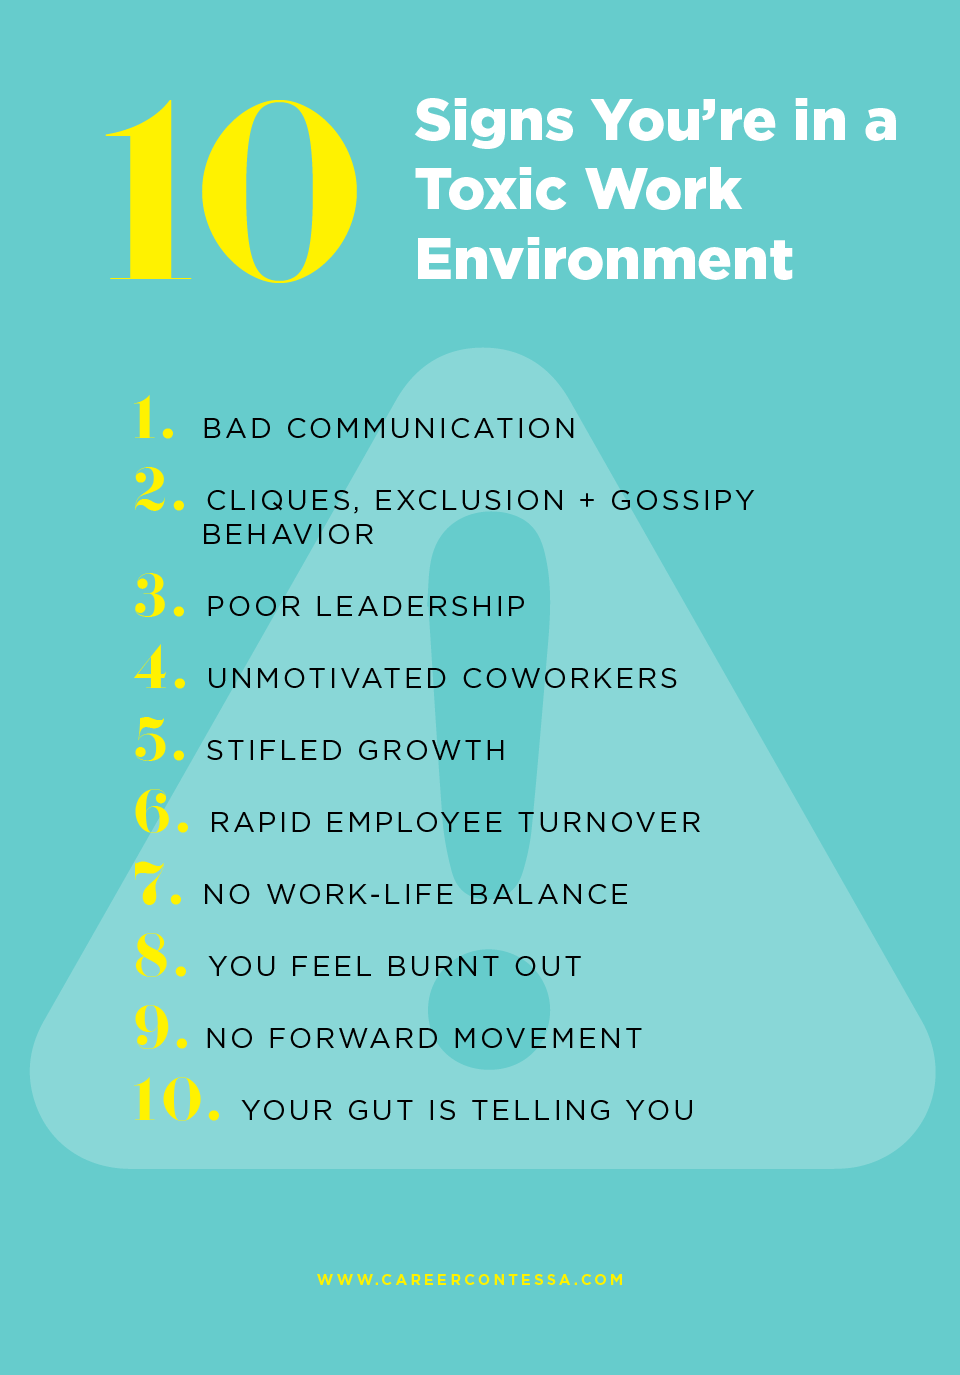 10 Signs of a Toxic Work Environments